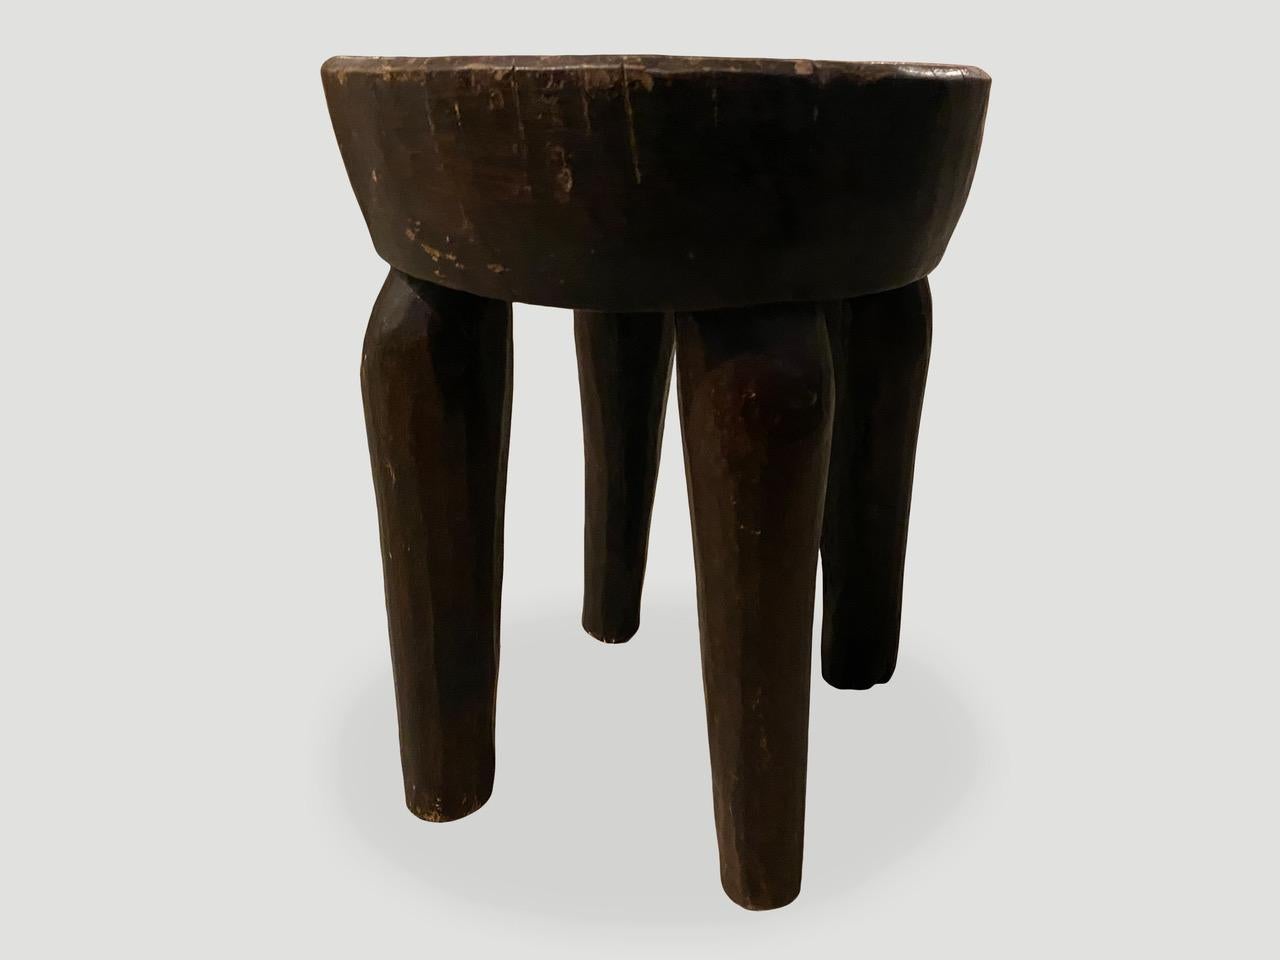 Antique African side table or stool hand carved from a single block of mahogany wood. The top is a thick bevel with beautiful hand carved legs and lovely patina. We only source the best.

This side table or stool was sourced in the spirit of